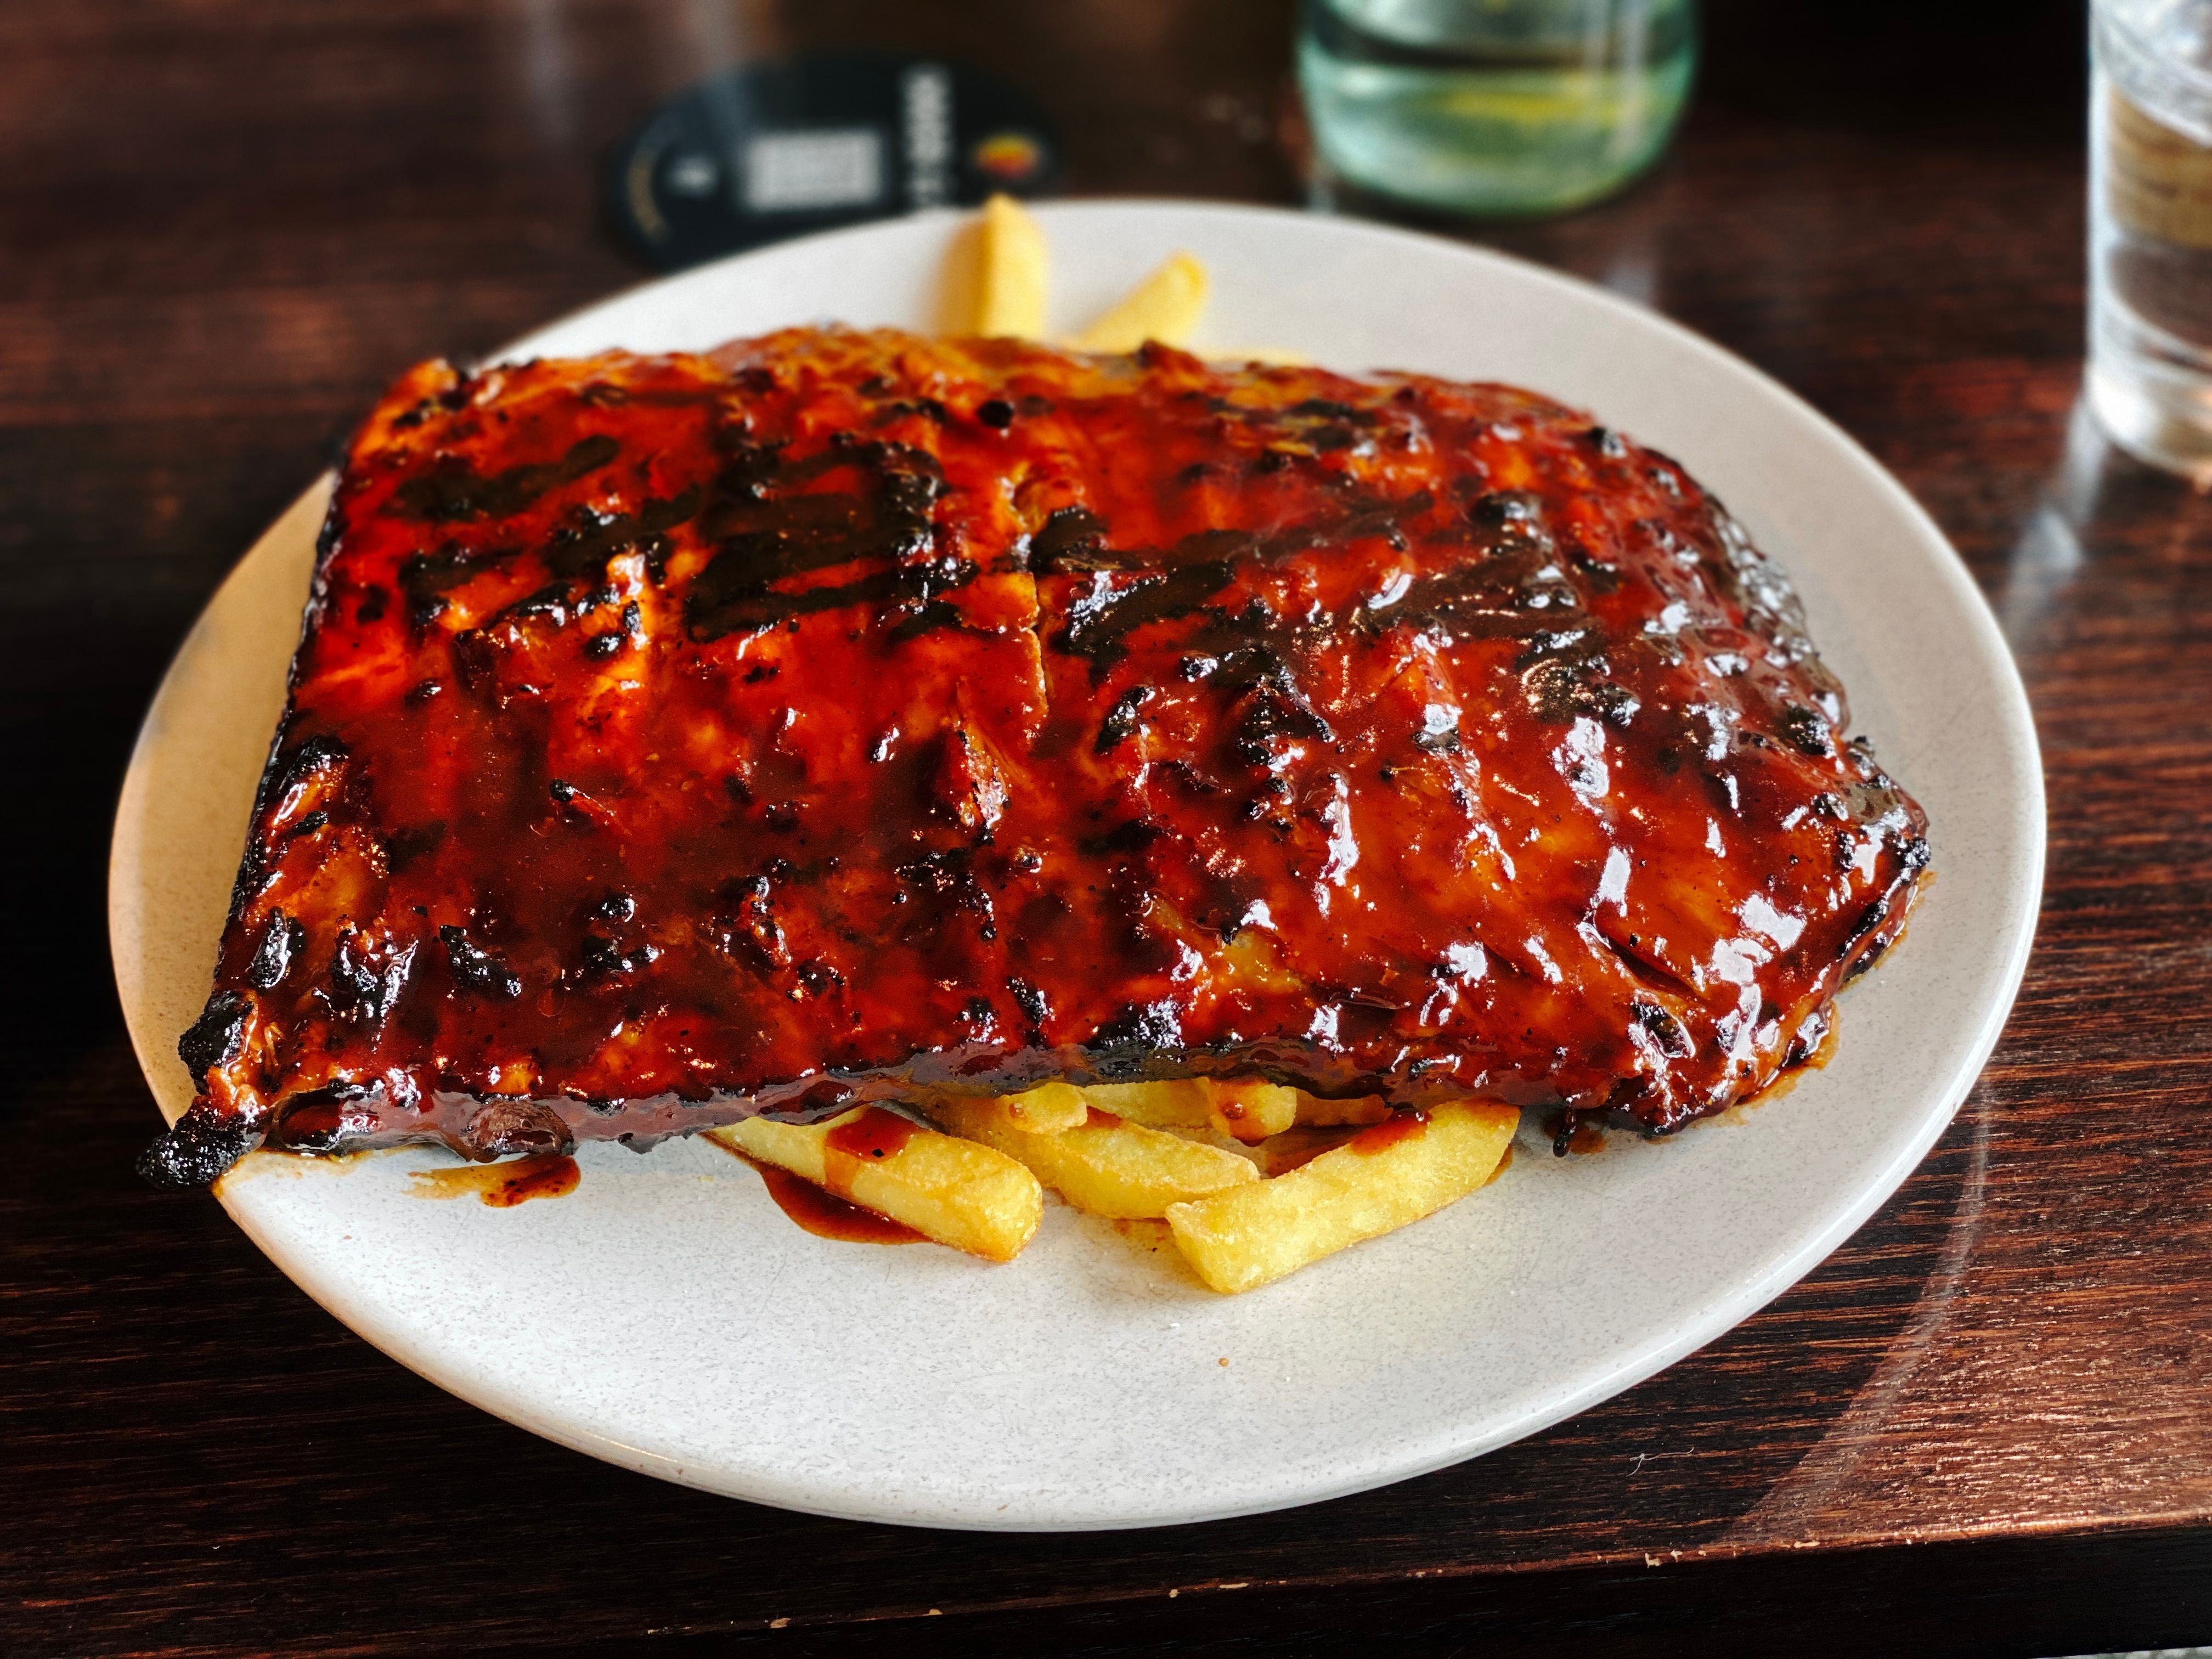 A photo of a half rack of ribs slathered in sauce sitting on top of hot chips.